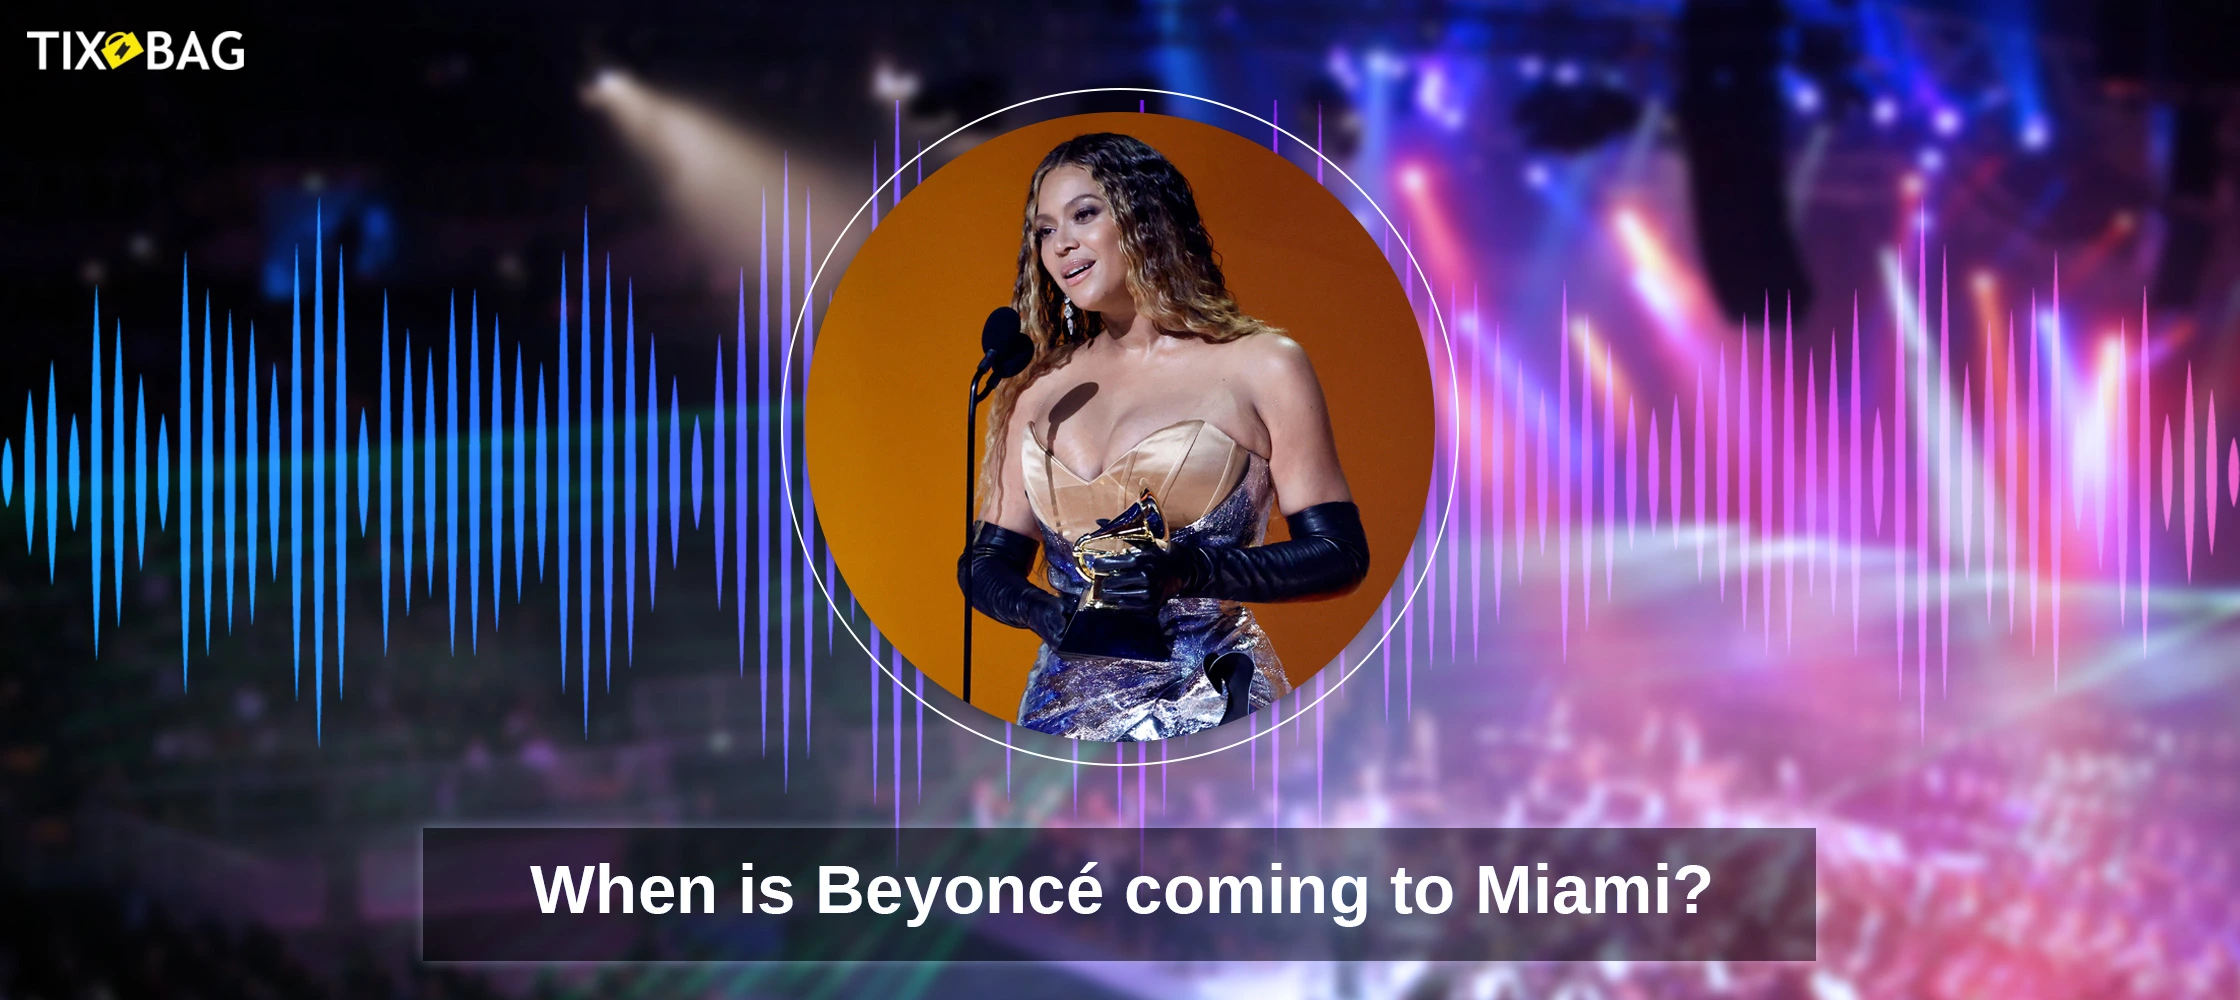 When is Beyoncé coming to Miami?